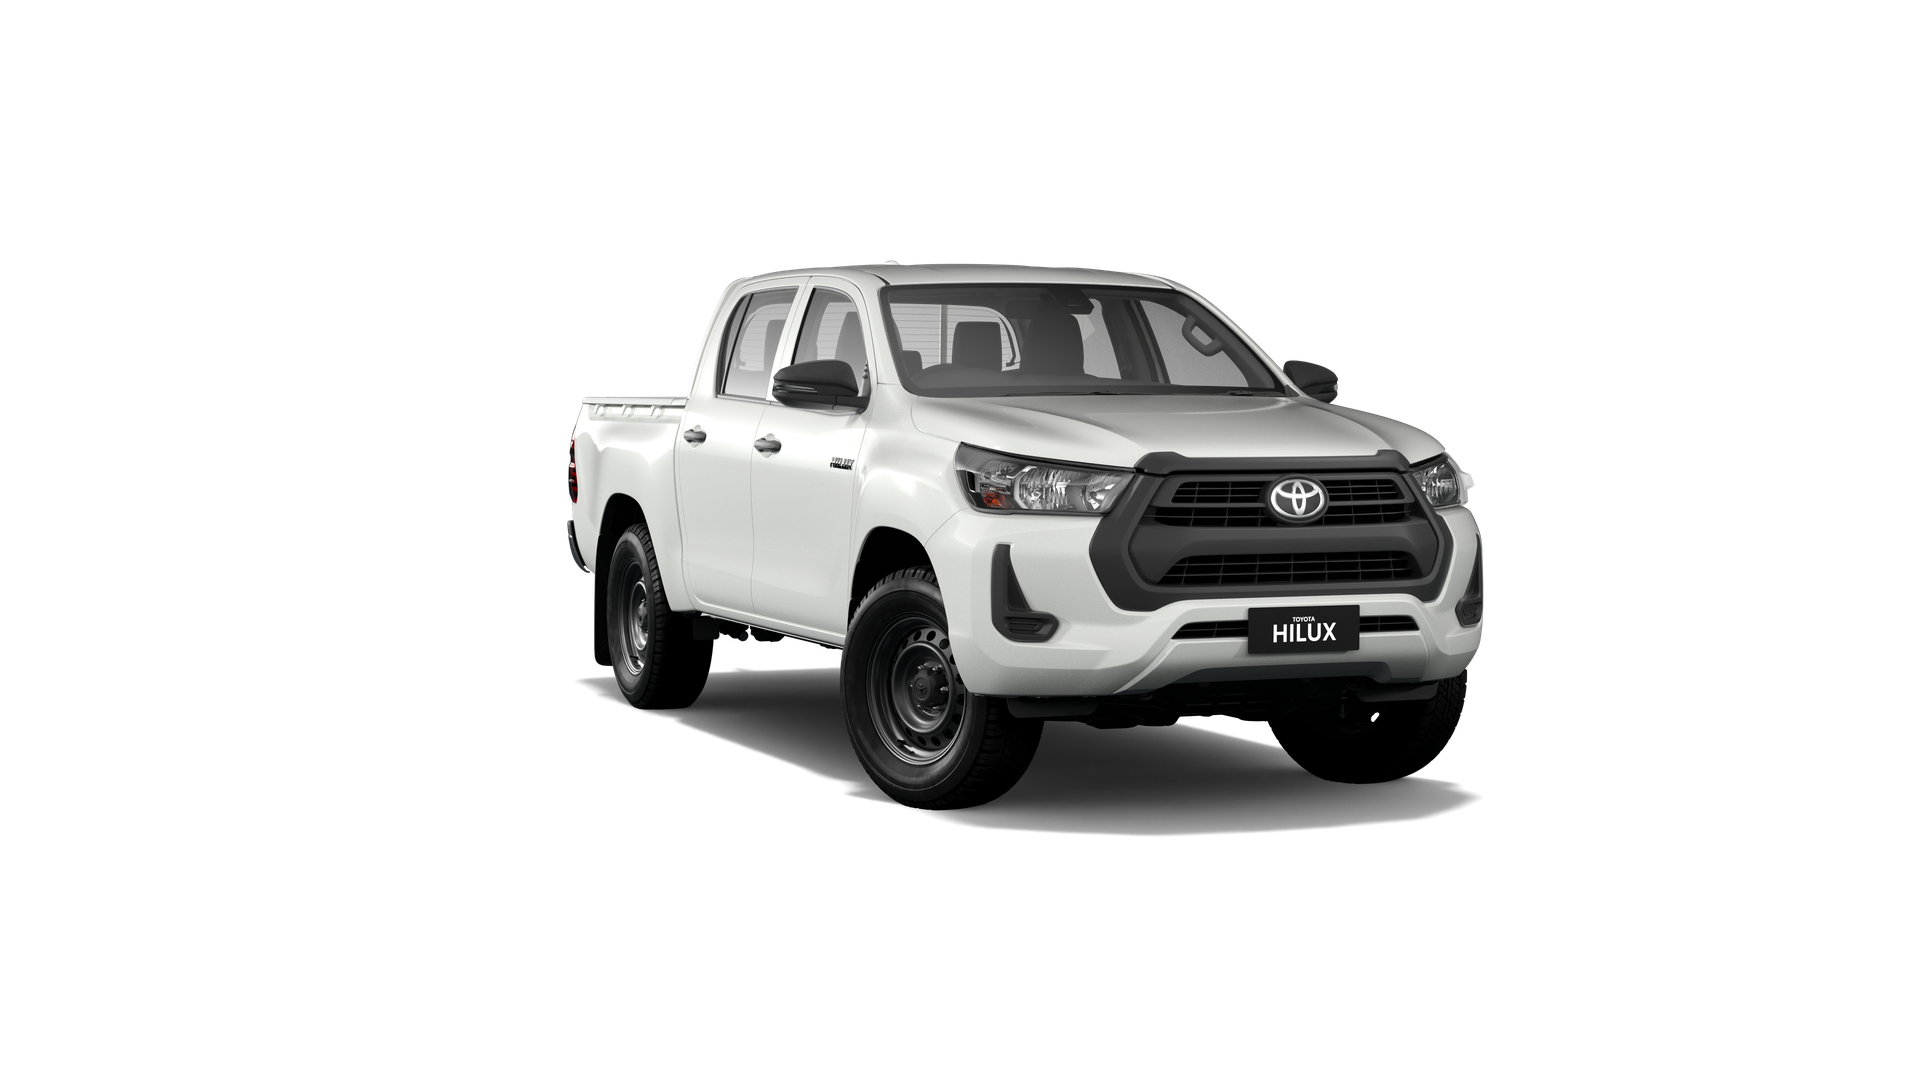 HiLux 4x4 WorkMate